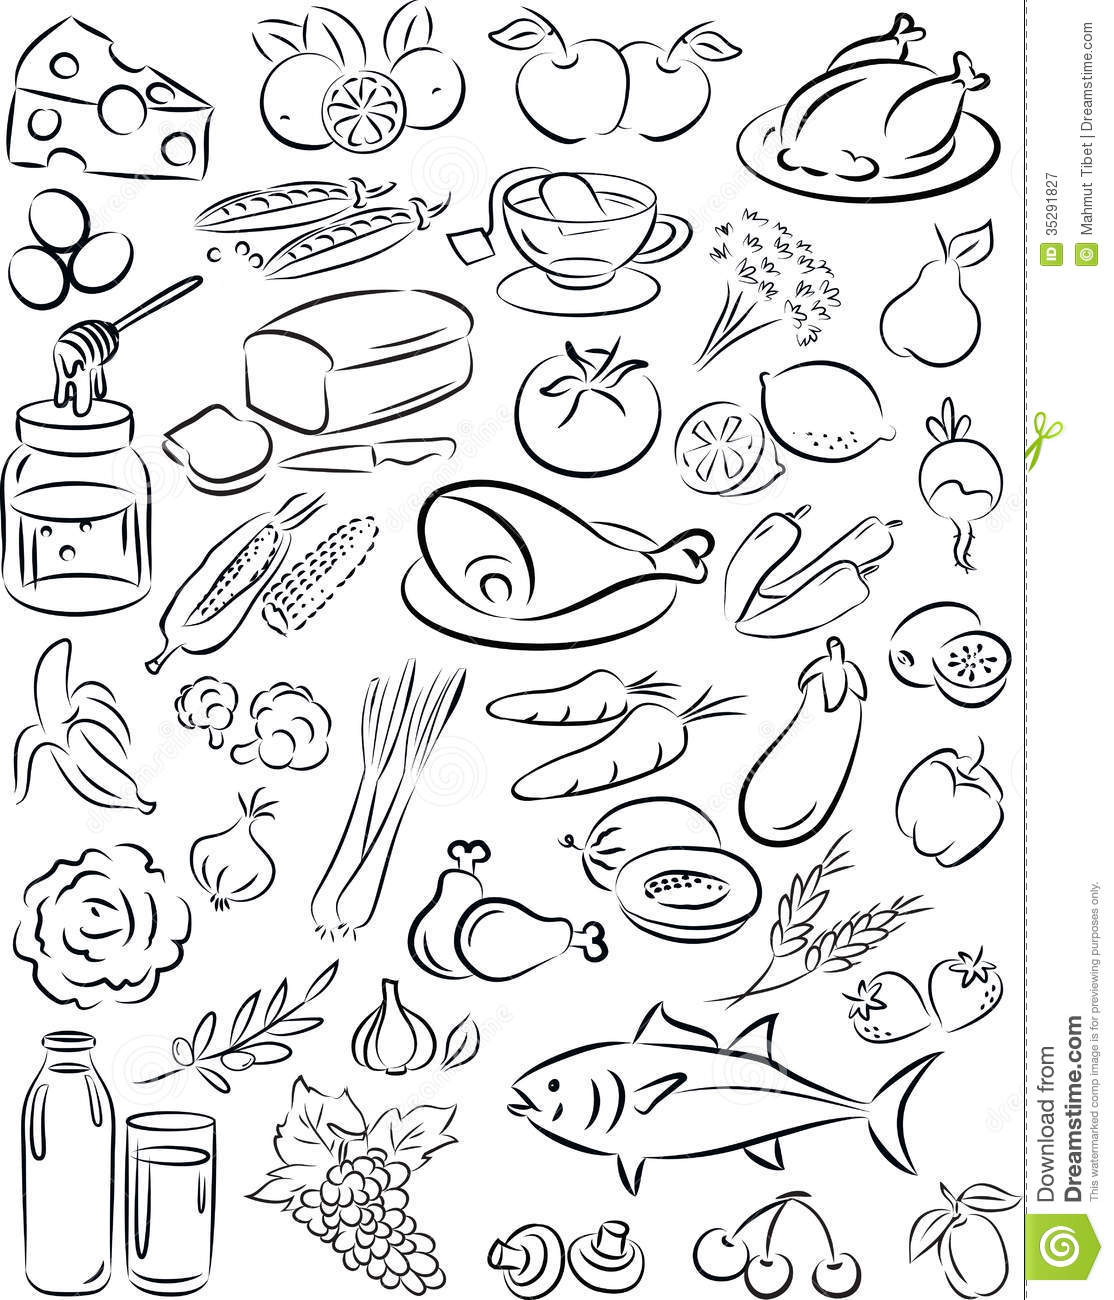 Healthy Food Clip Art Black and White